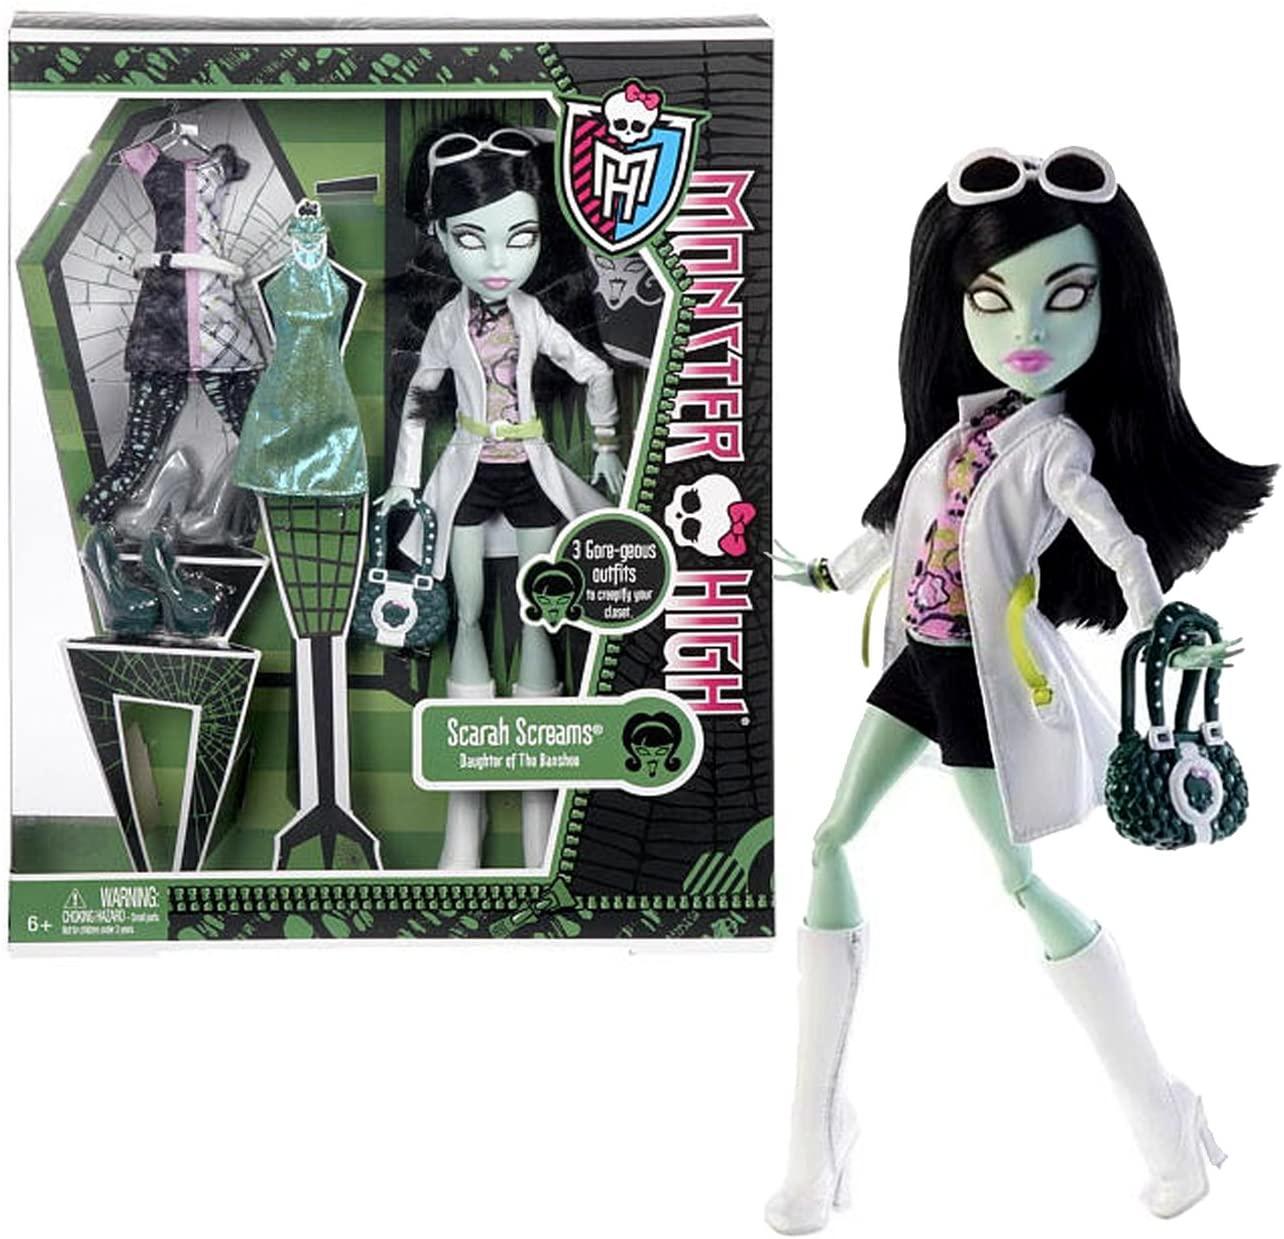 Monster High Mattel Year 2013 I Love Fashion Series Exclusive 11 Inch Doll Set - SCARAH Screams Daughter of The Banshee with 3 Gore-geous Outfits, Purse, Sunglasses, Hairbrush and Doll Stand